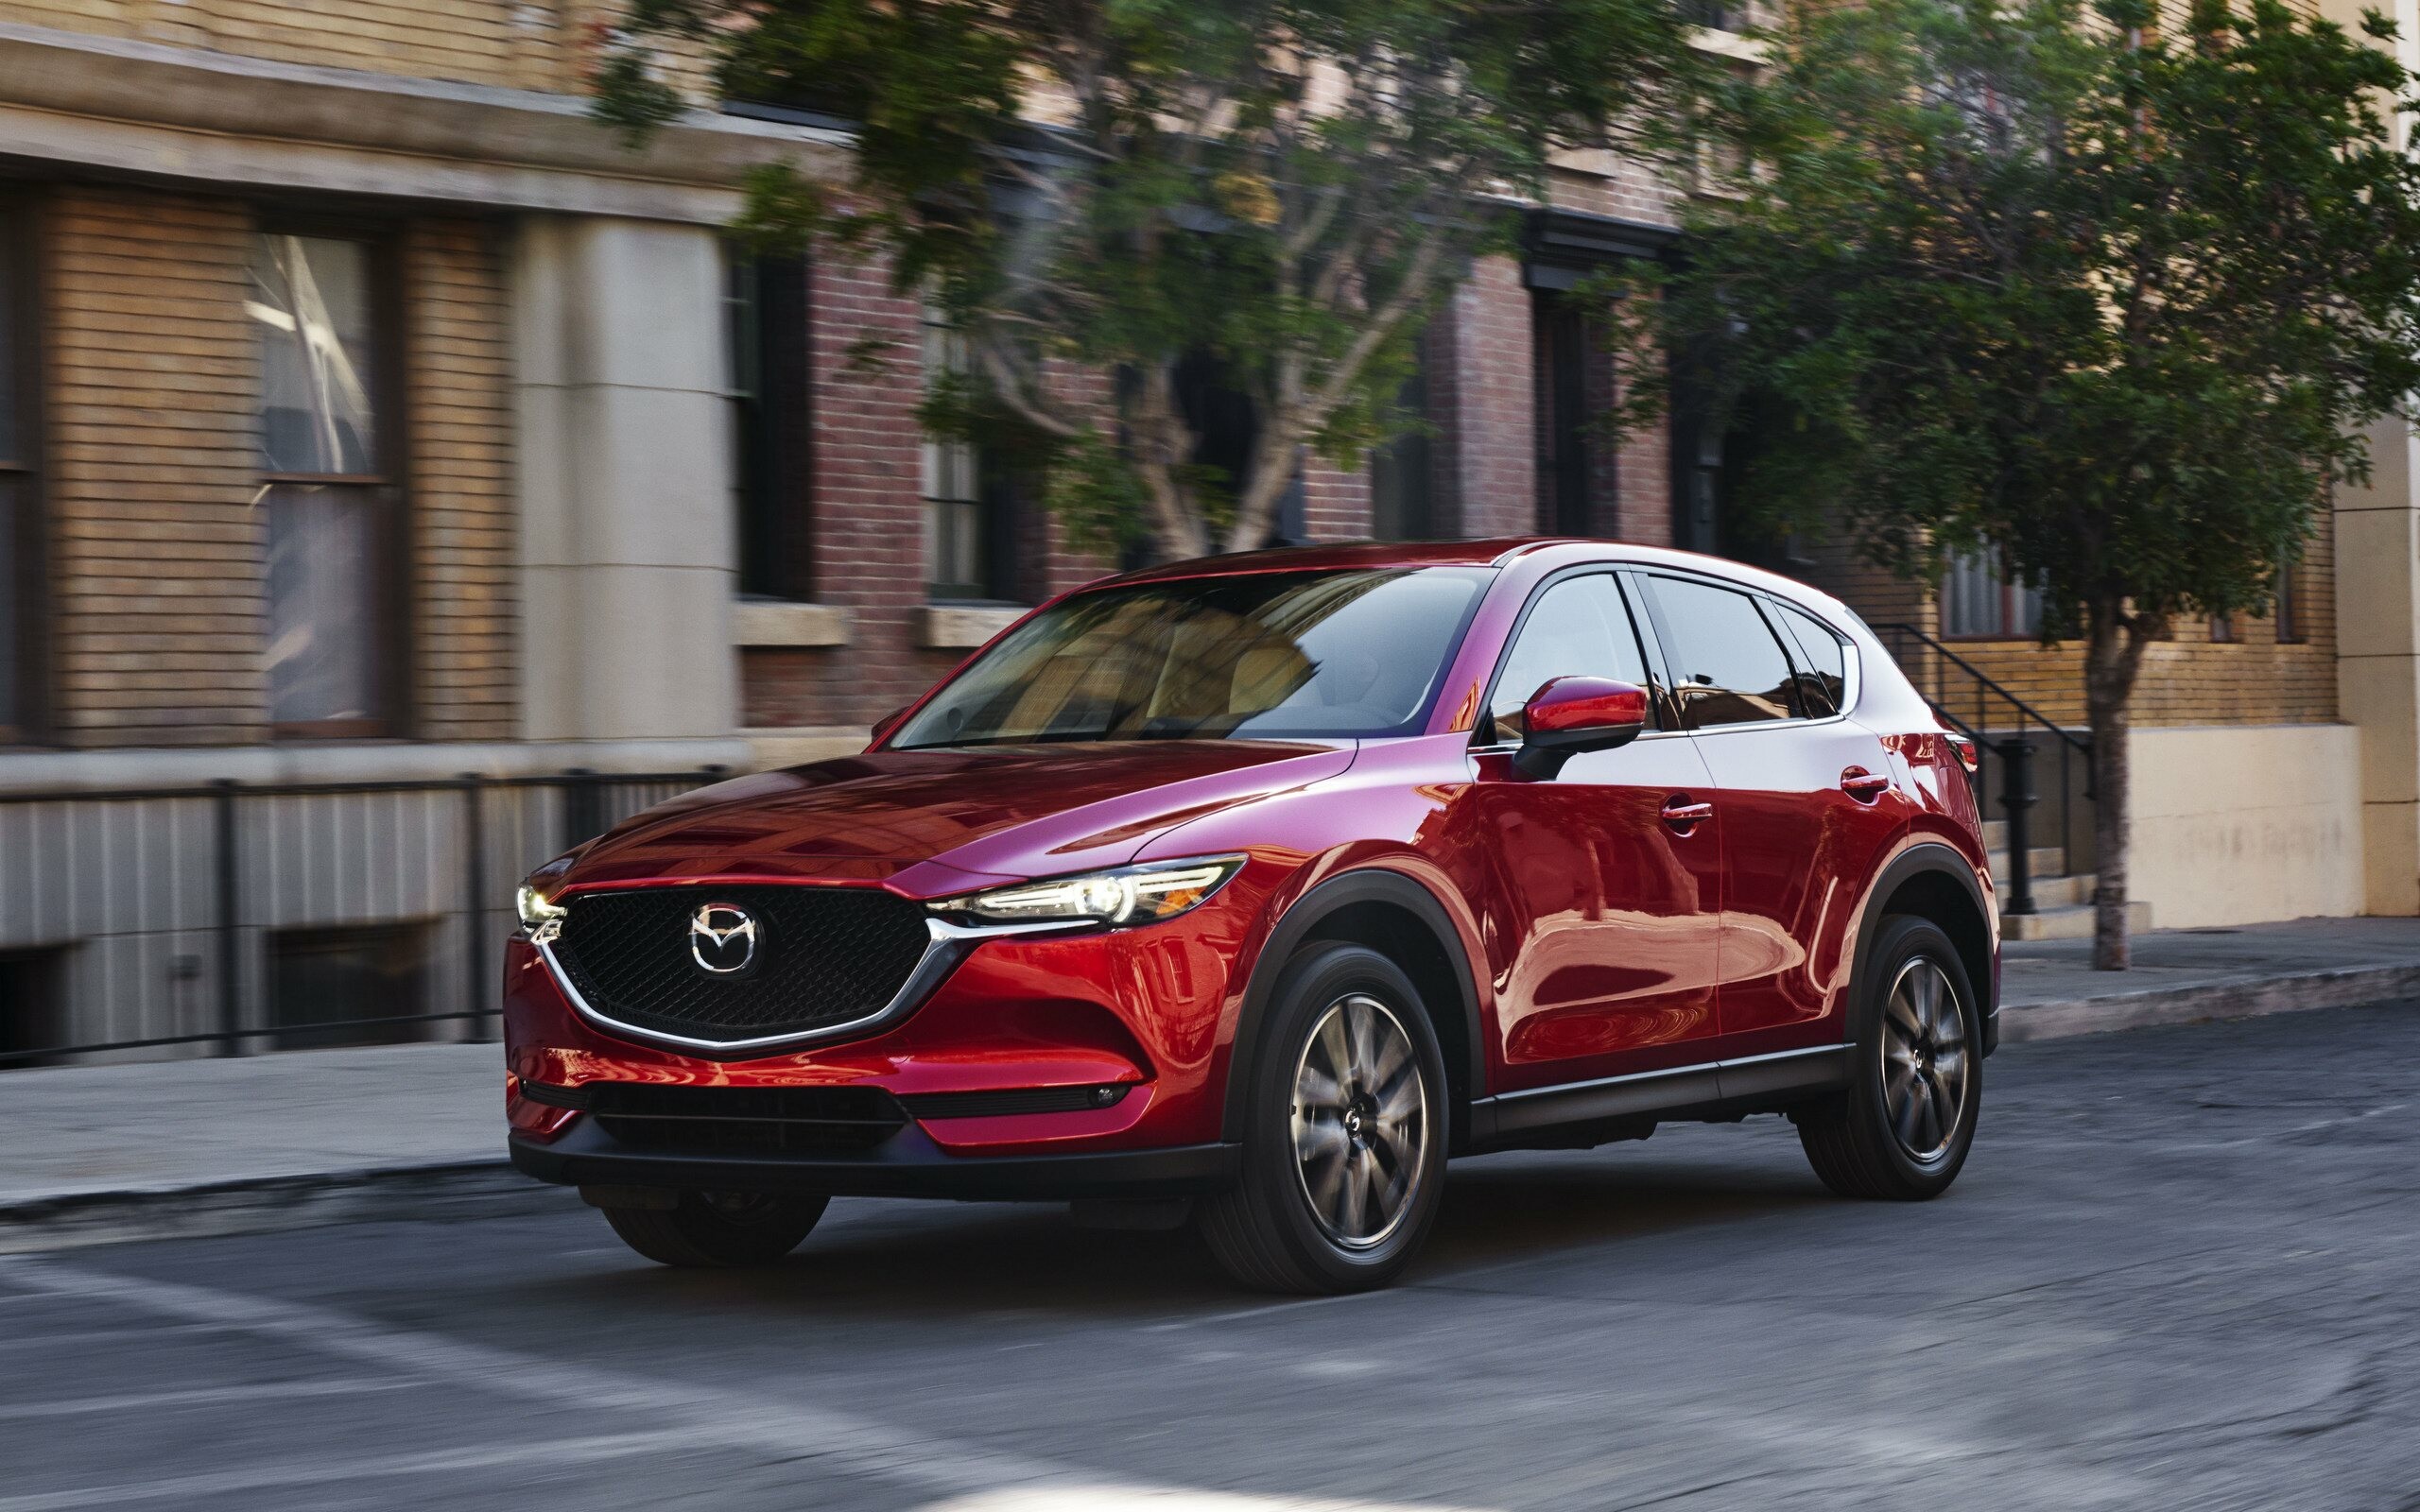 Mazda CX-5, Red hot crossover, Japanese engineering, Unmatched quality, 2560x1600 HD Desktop